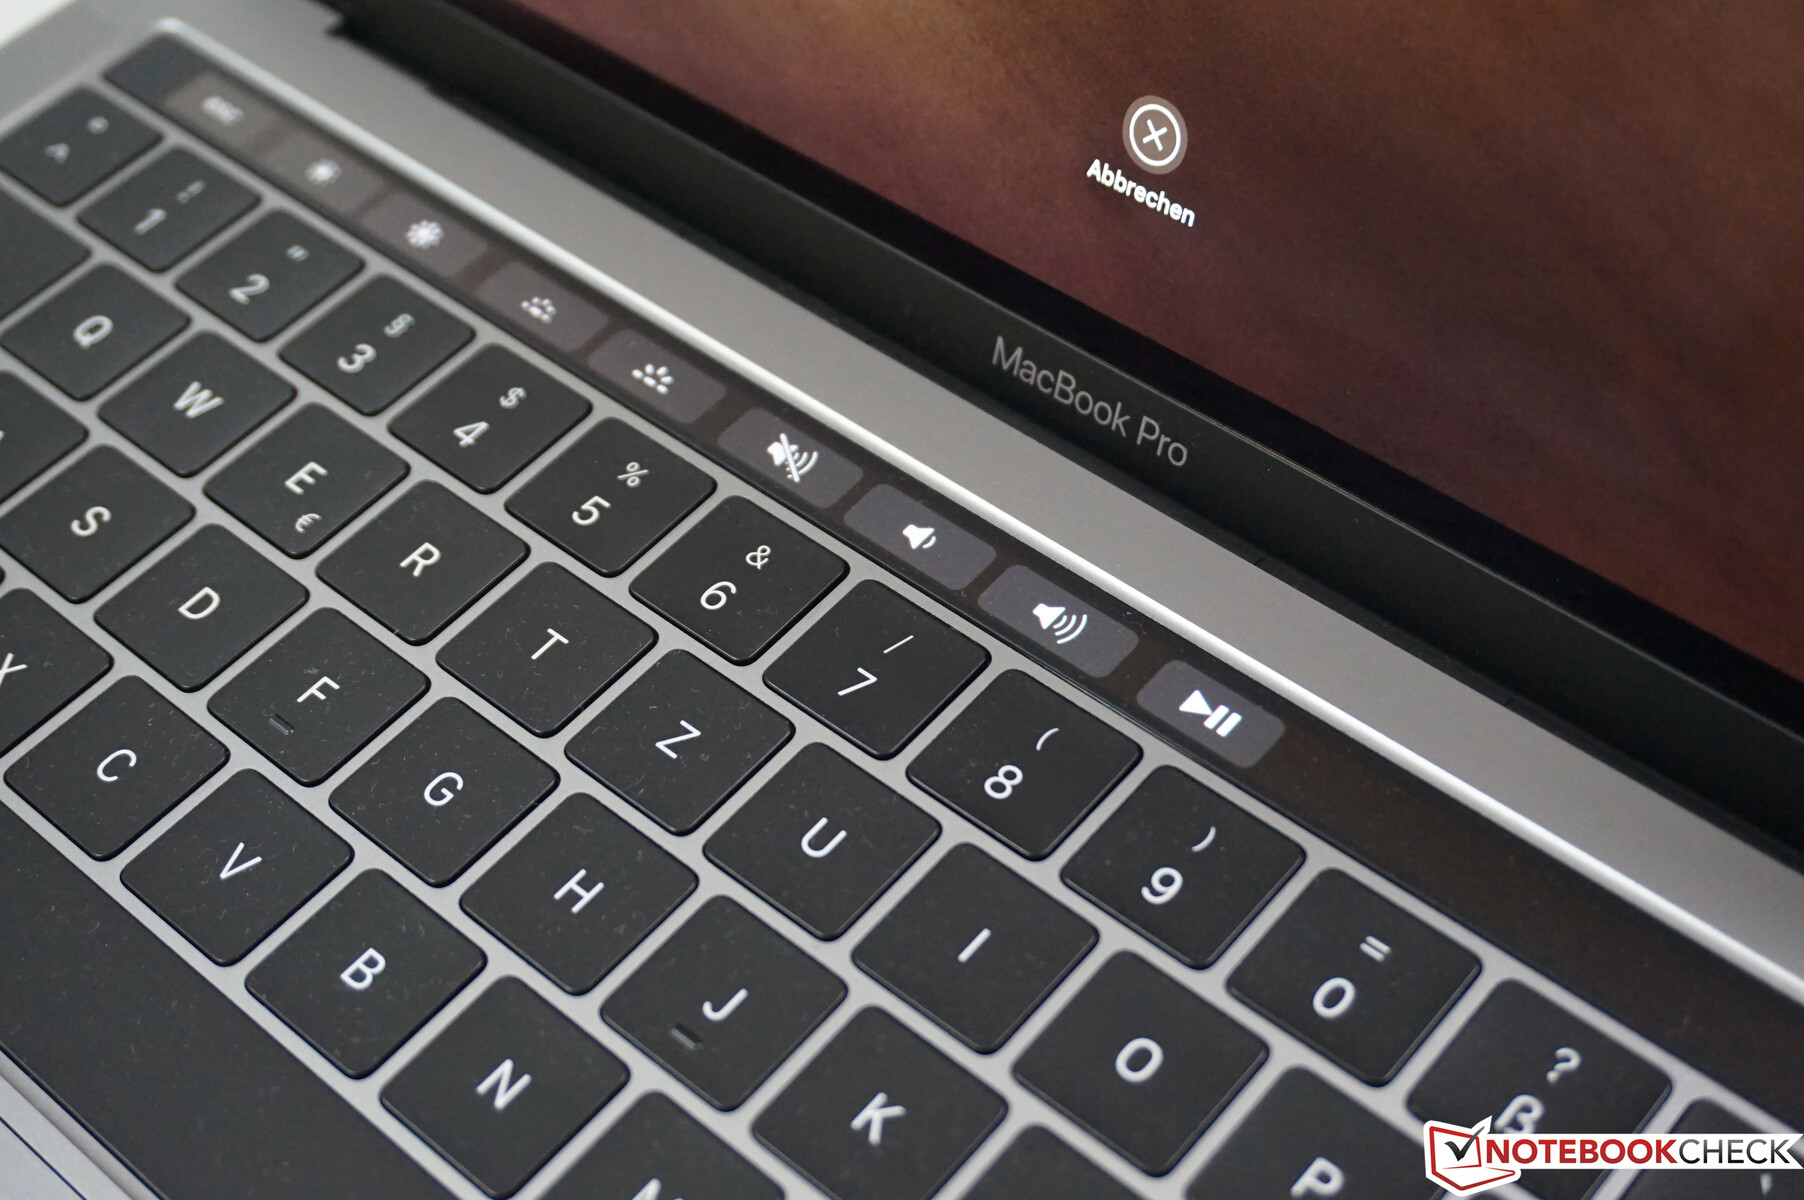 Apple MacBook Pro 13 2019: Entry-Level Pro with Touch Bar in 